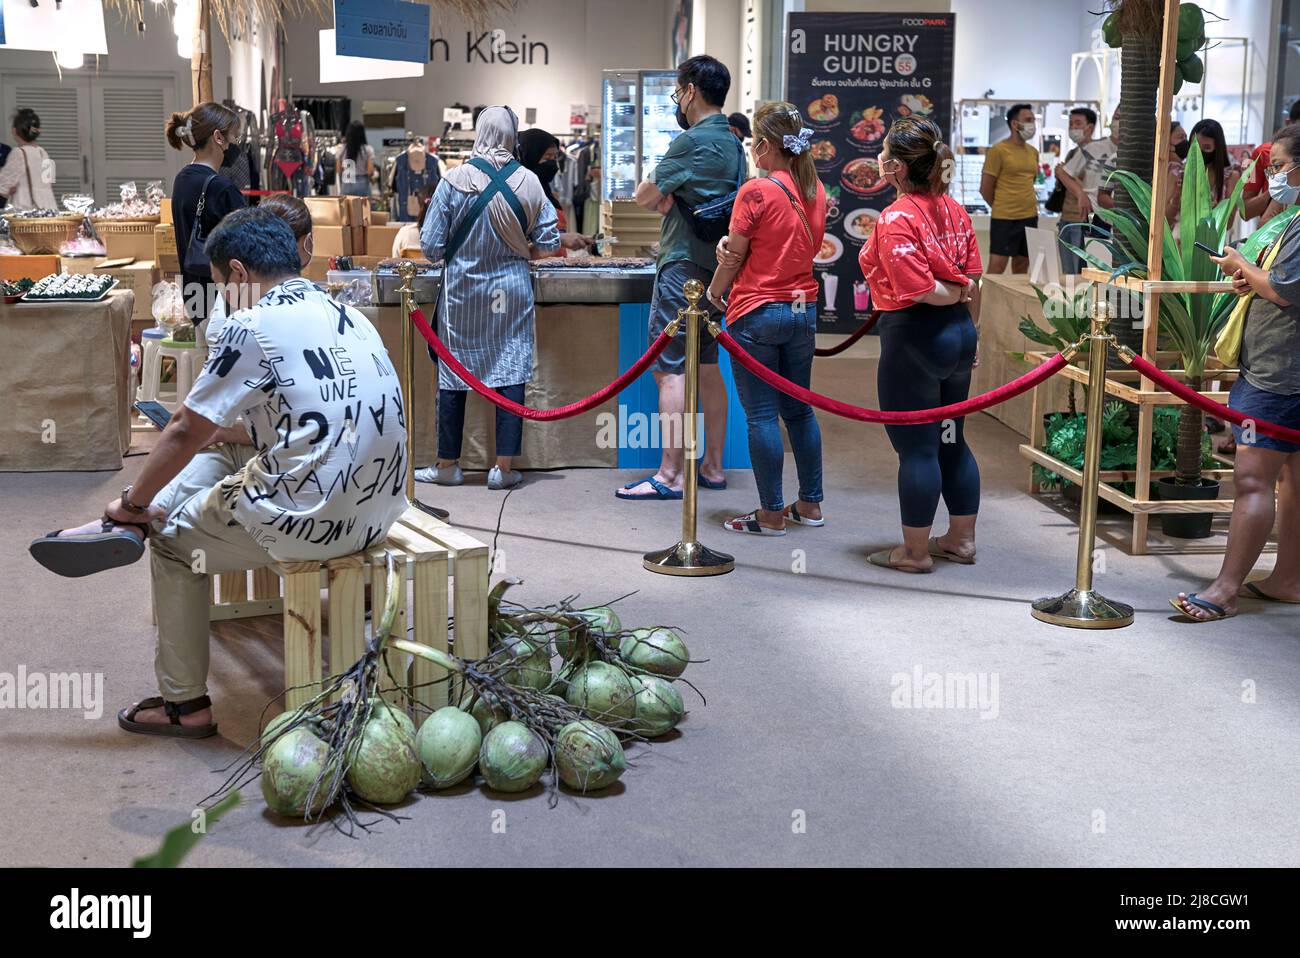 People queuing inside in a roped off cordoned area for a coconut food delicacy in a Thailand shopping mall. Southeast Asia Stock Photo